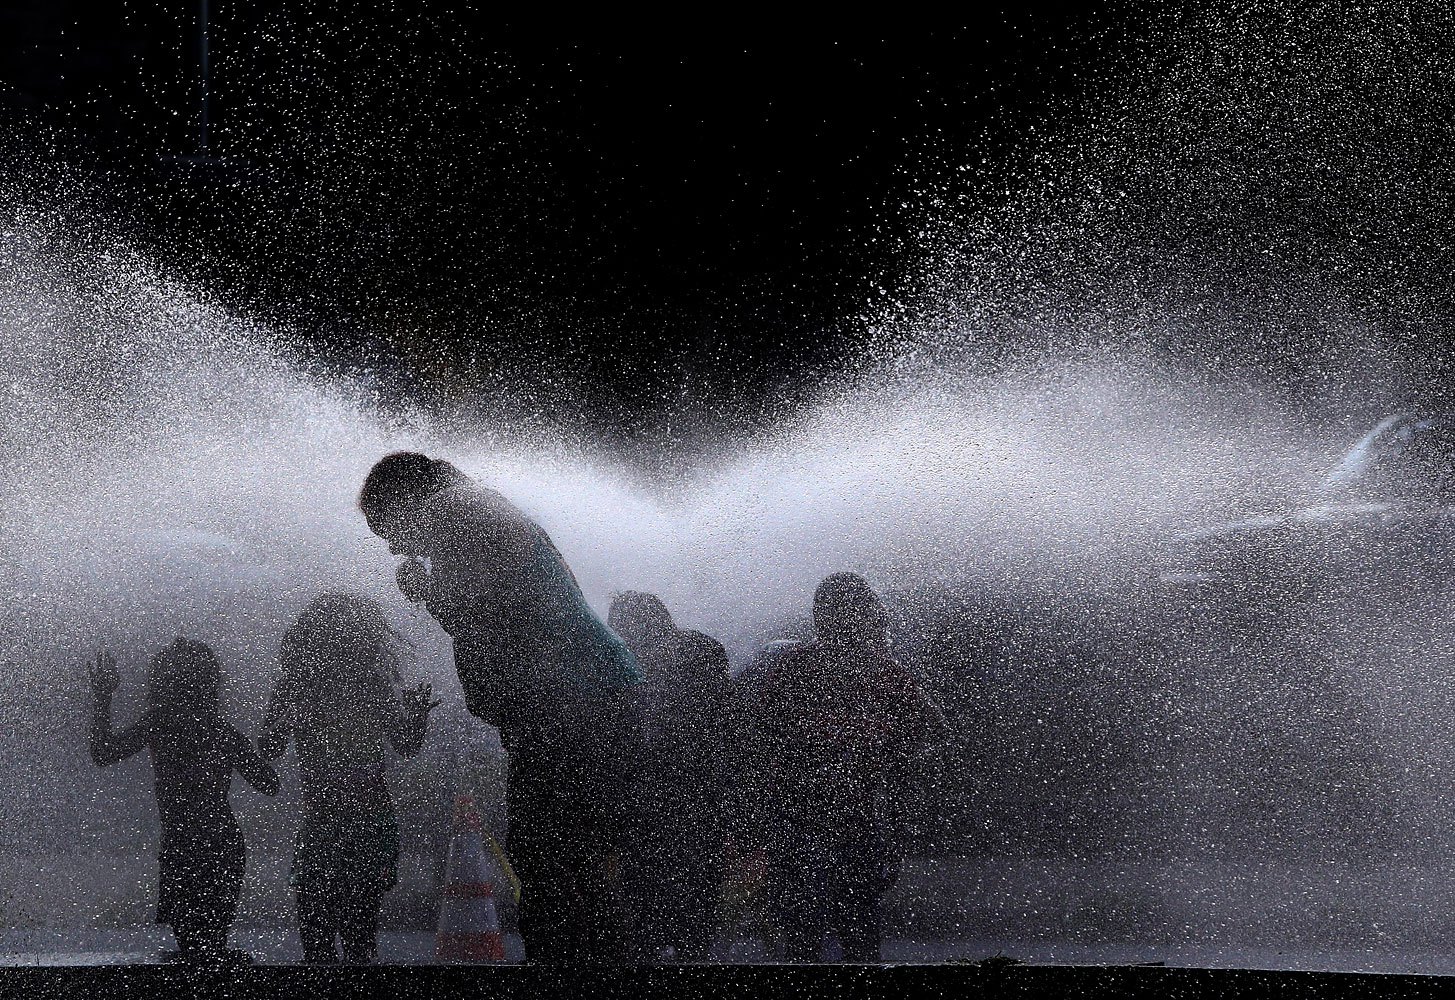 People cool off in the spray of an open hydrant on a hot evening in Lawrence, Mass., July 16, 2013. Americans across the northeast and midwest tried to keep their cool after several consecutive 90-degree days.